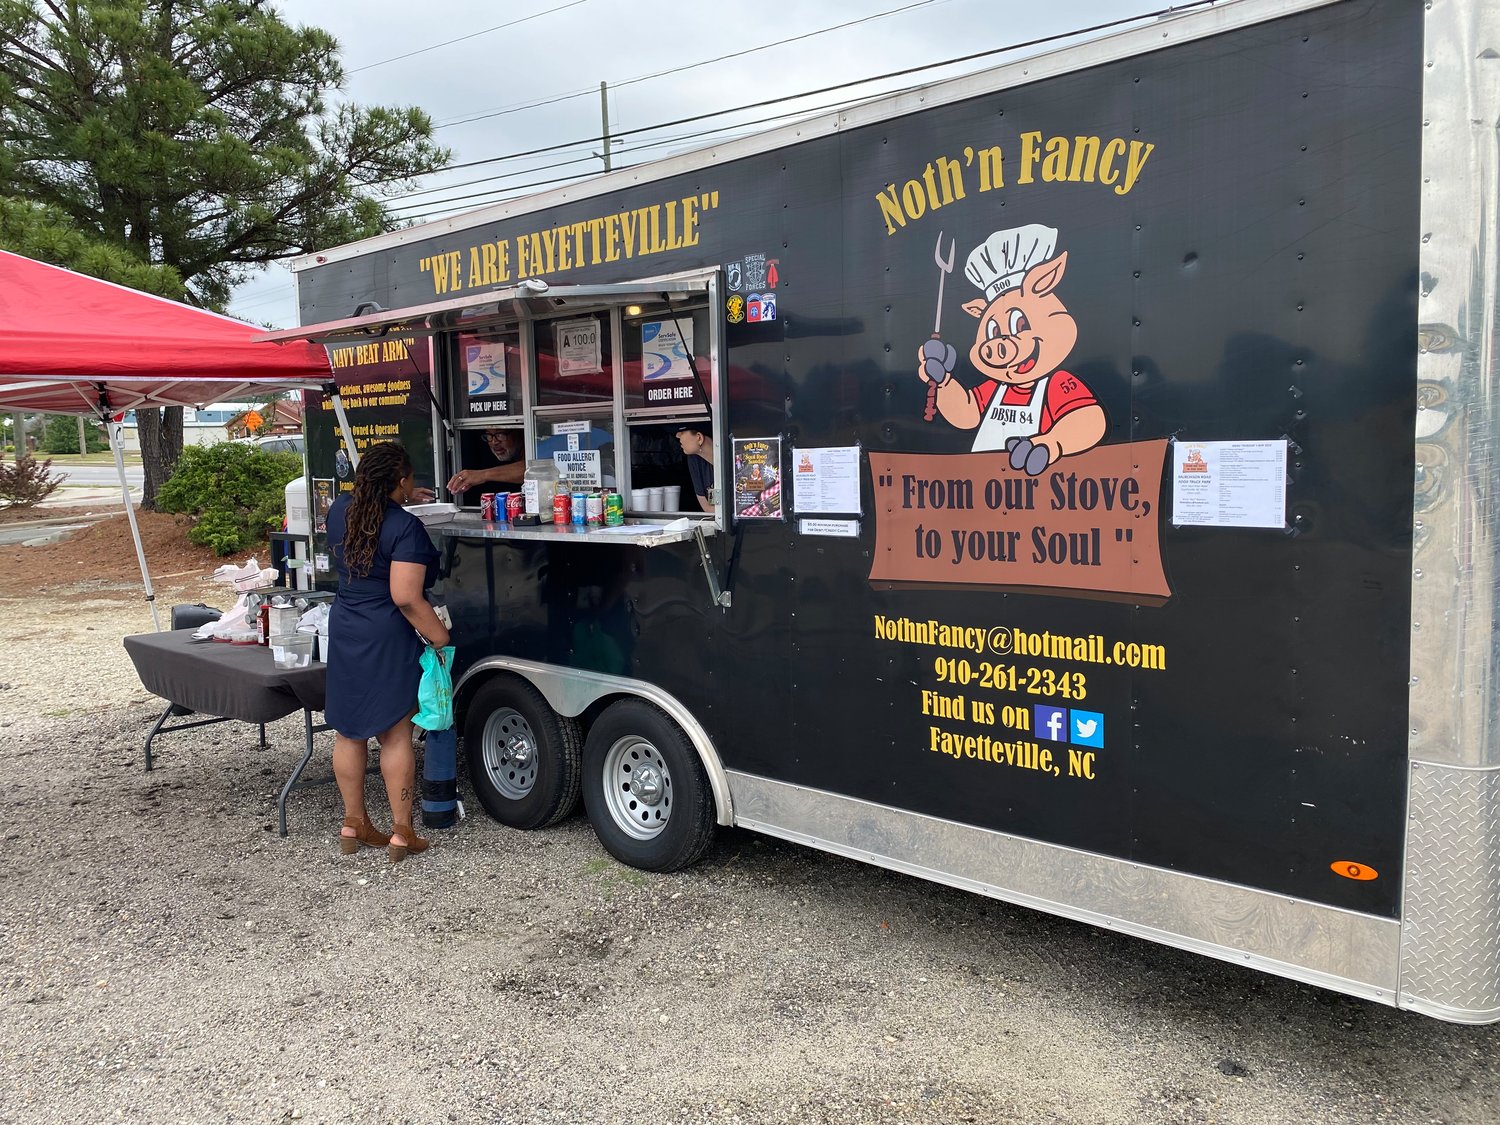 Candice Cameron, 40, of Fayetteville, orders smoked chicken wings, baked beans and macaroni and cheese from Noth'n Fancy food truck at the Murchison Road Food Truck Park in Fayetteville on Thursday. The Murchison Road Food Truck Park is open Fridays and Saturdays, from 11 a.m. to 6 p.m.